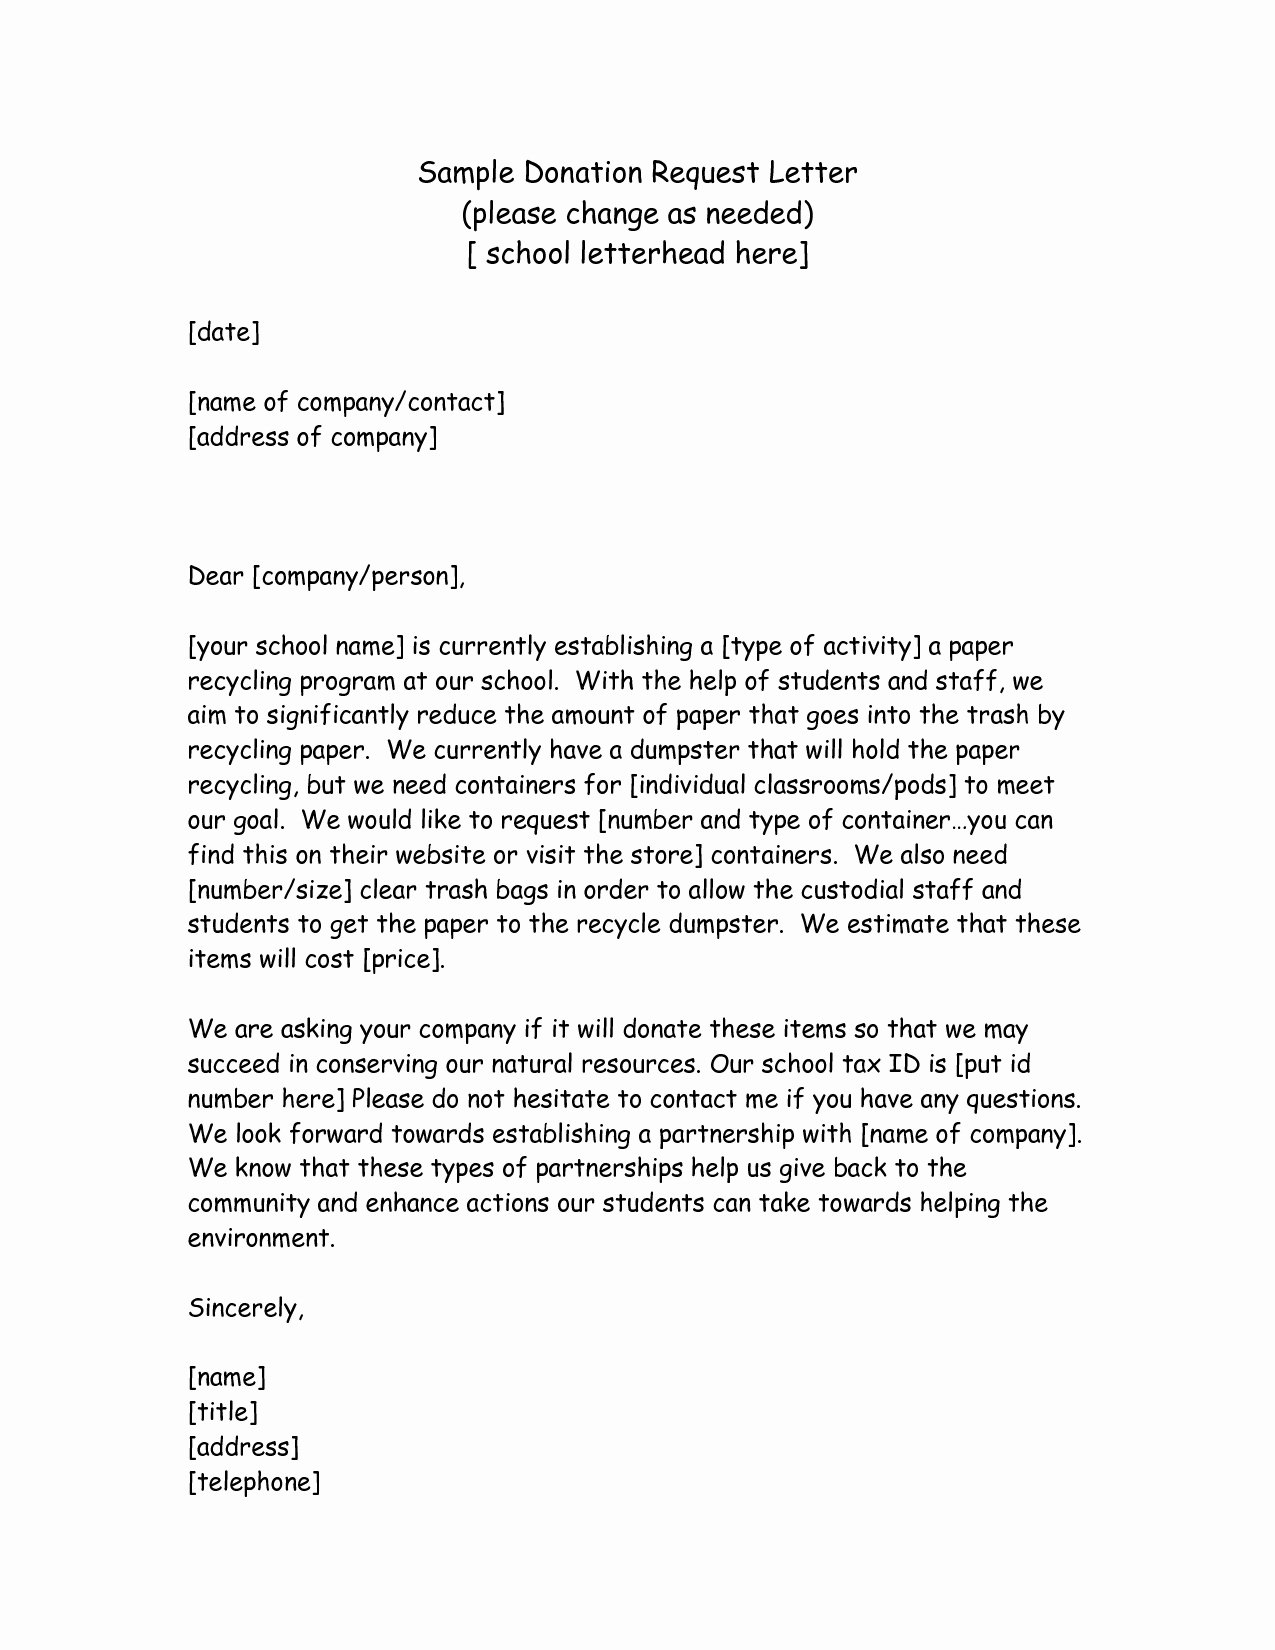 Charitable Donation Letter Template Awesome Charity Letter Template asking for Donations Examples